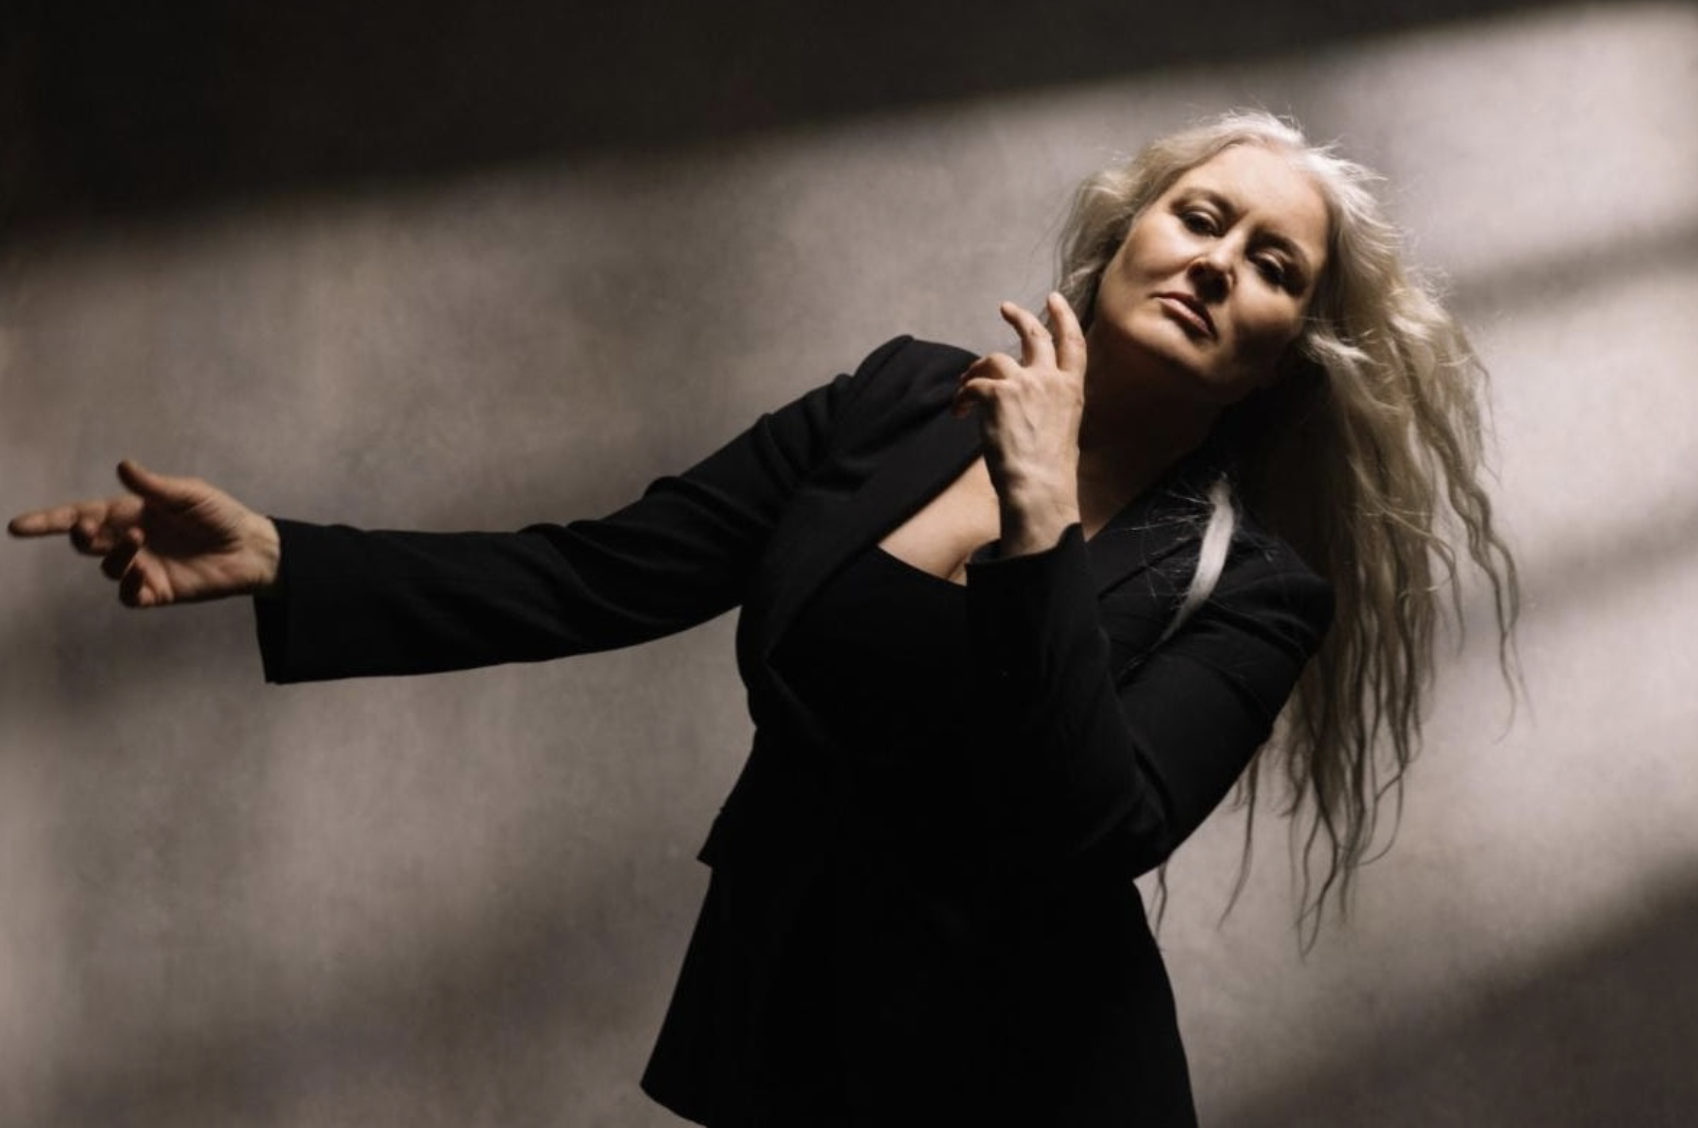 ROCK CELLAR ~ “I Just Needed to Be Brave Again”: Paula Cole on Her New Album, ‘Lo,’ and Embracing Vulnerability (The Interview)